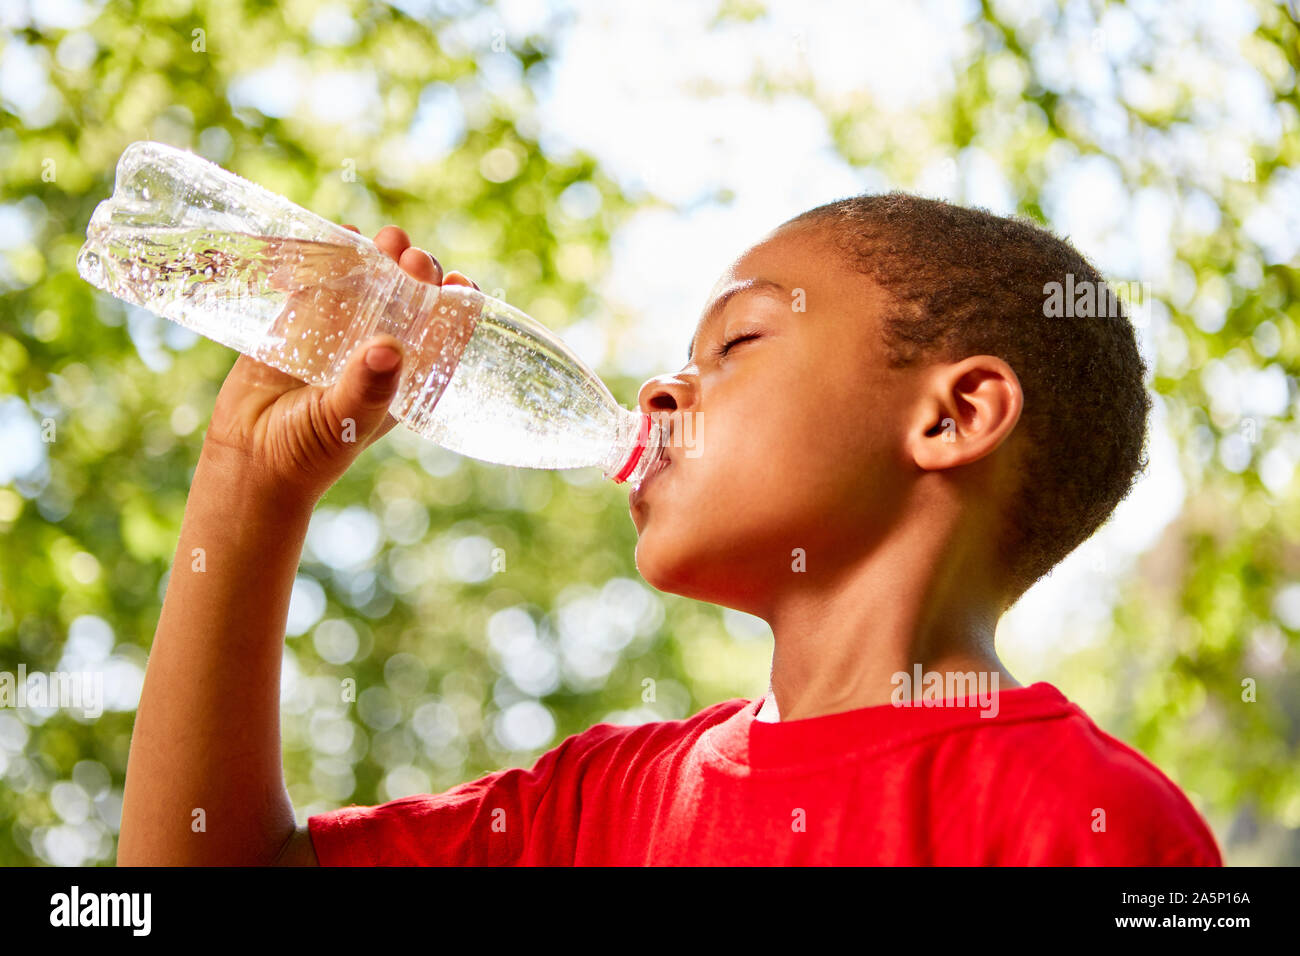 https://c8.alamy.com/comp/2A5P16A/african-boy-is-drinking-thirstily-from-a-water-bottle-2A5P16A.jpg